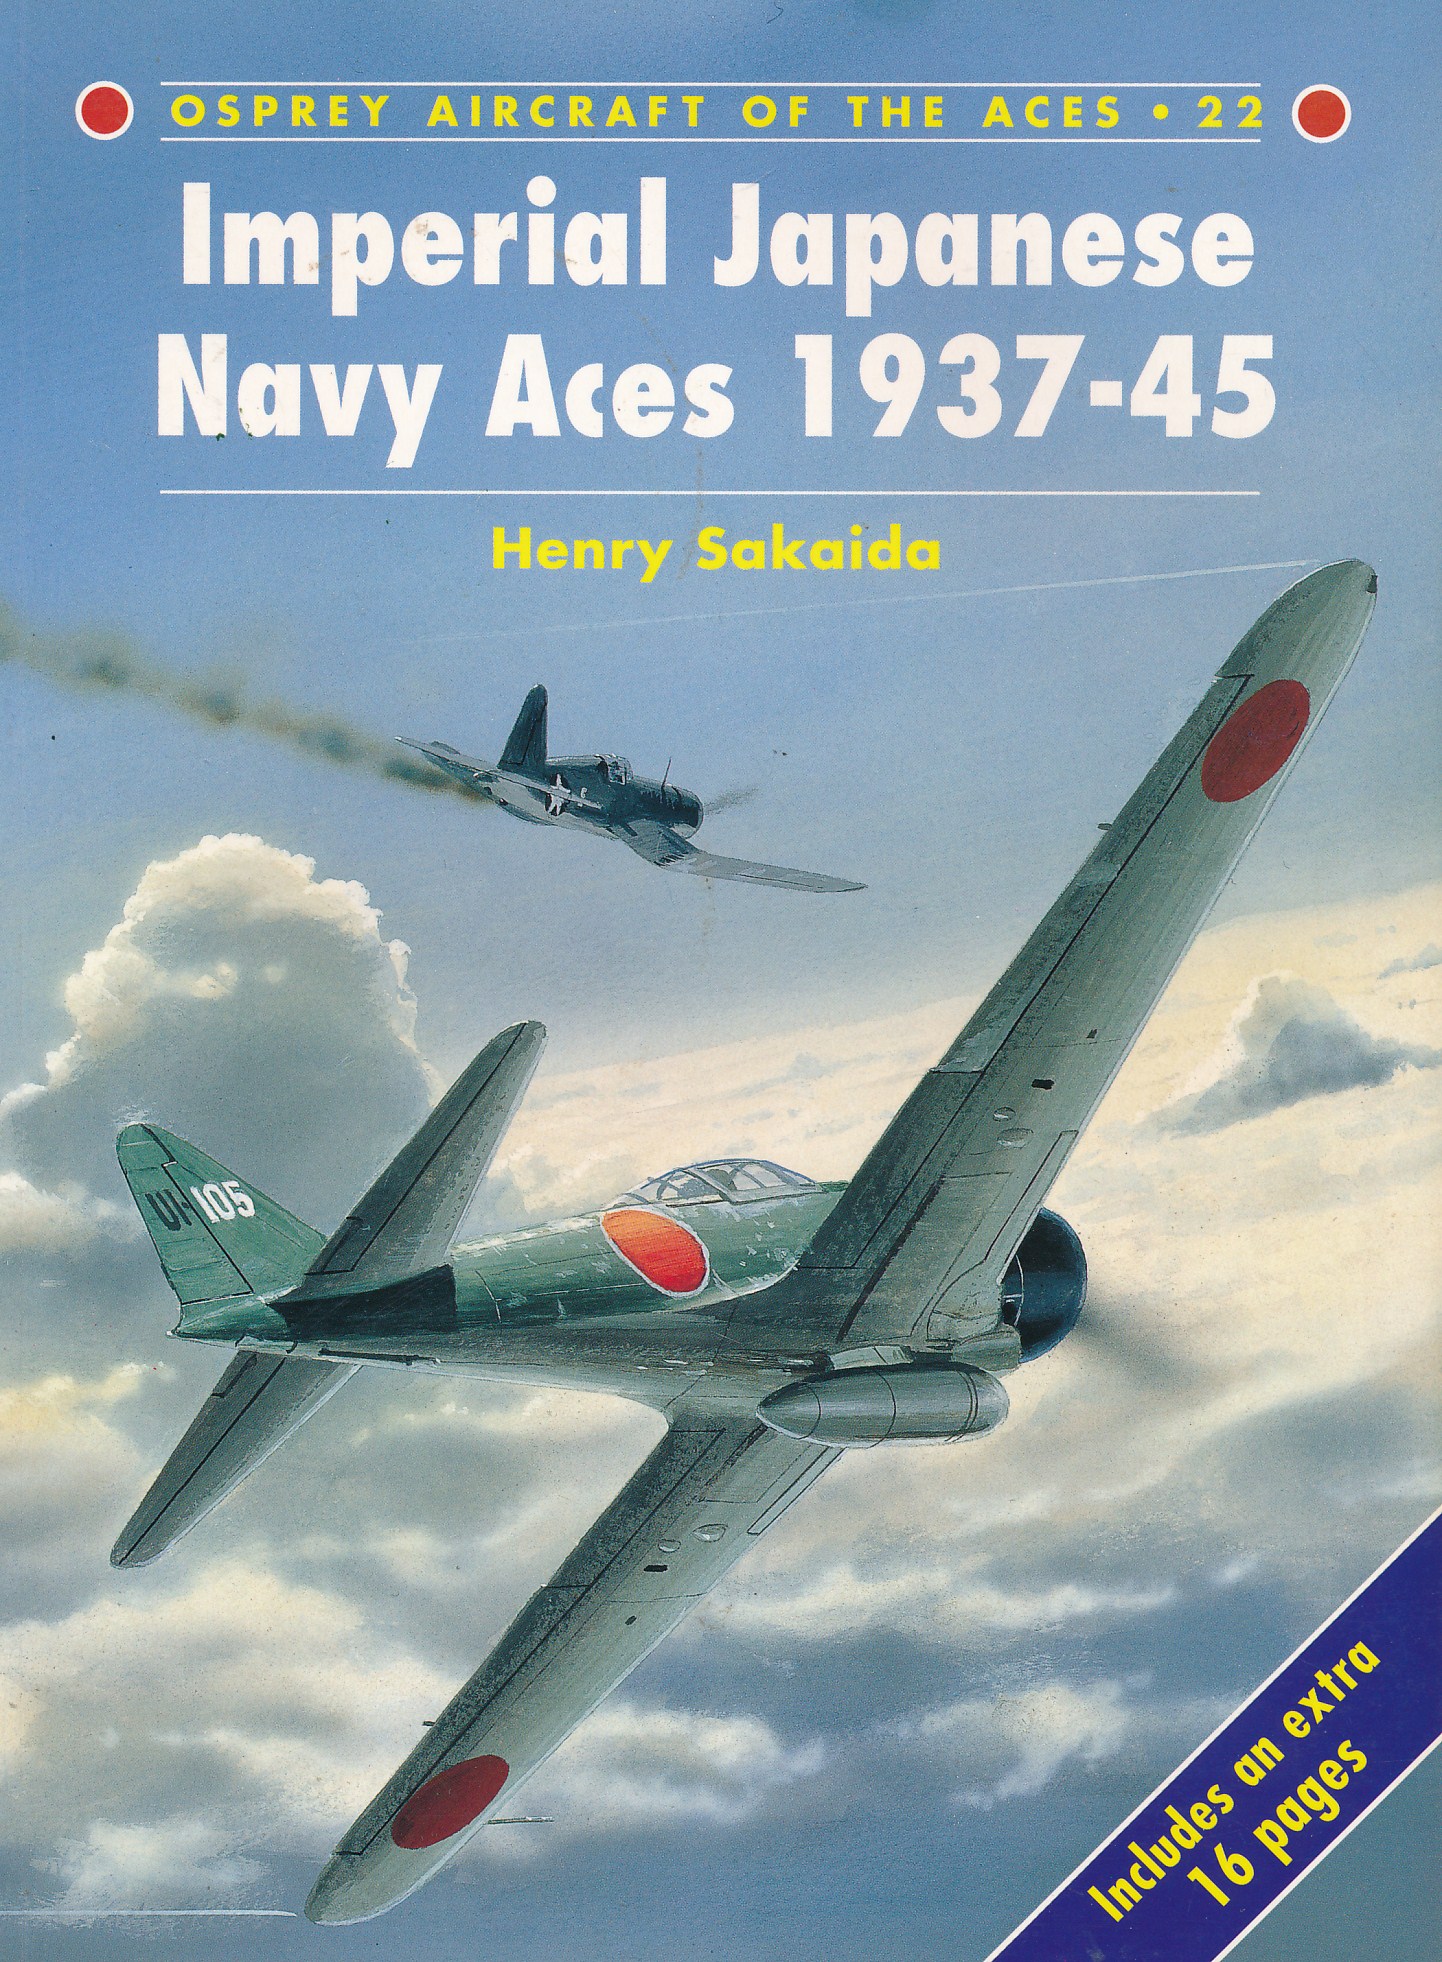 Imperial Japanese Navy Aces 1937-45. Aircraft of the Aces No 22